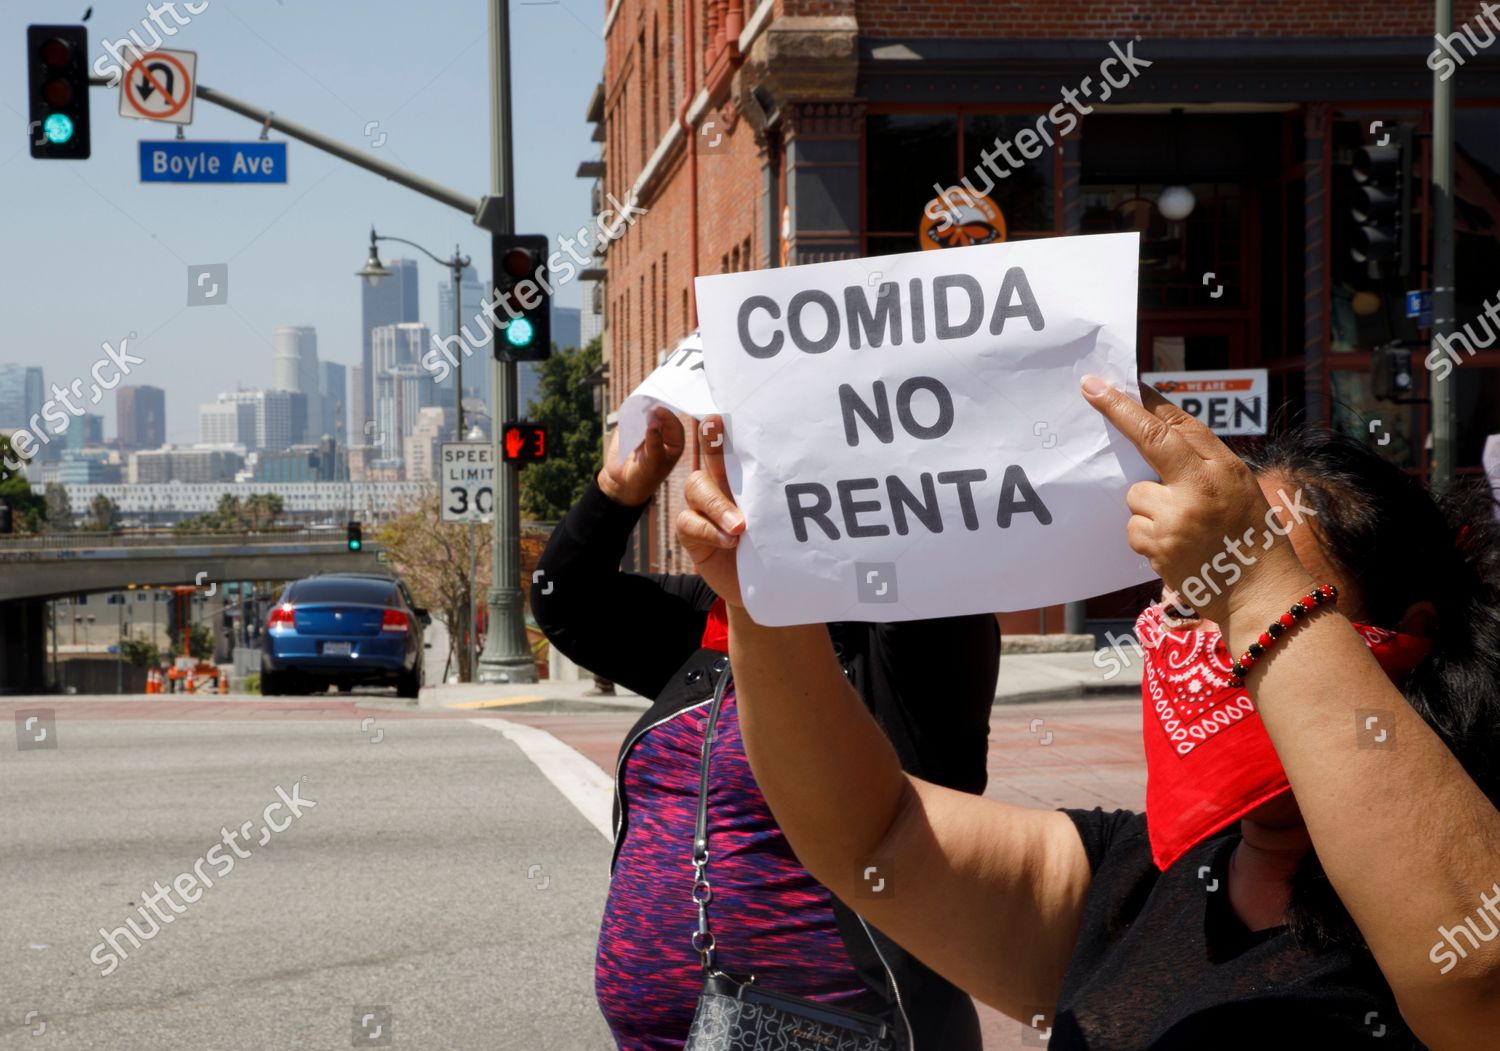 protesters-call-for-rent-forgiveness-in-los-angeles-due-to-coronavirus-pandemic-usa-shutterstock-editorial-10599689c.jpg